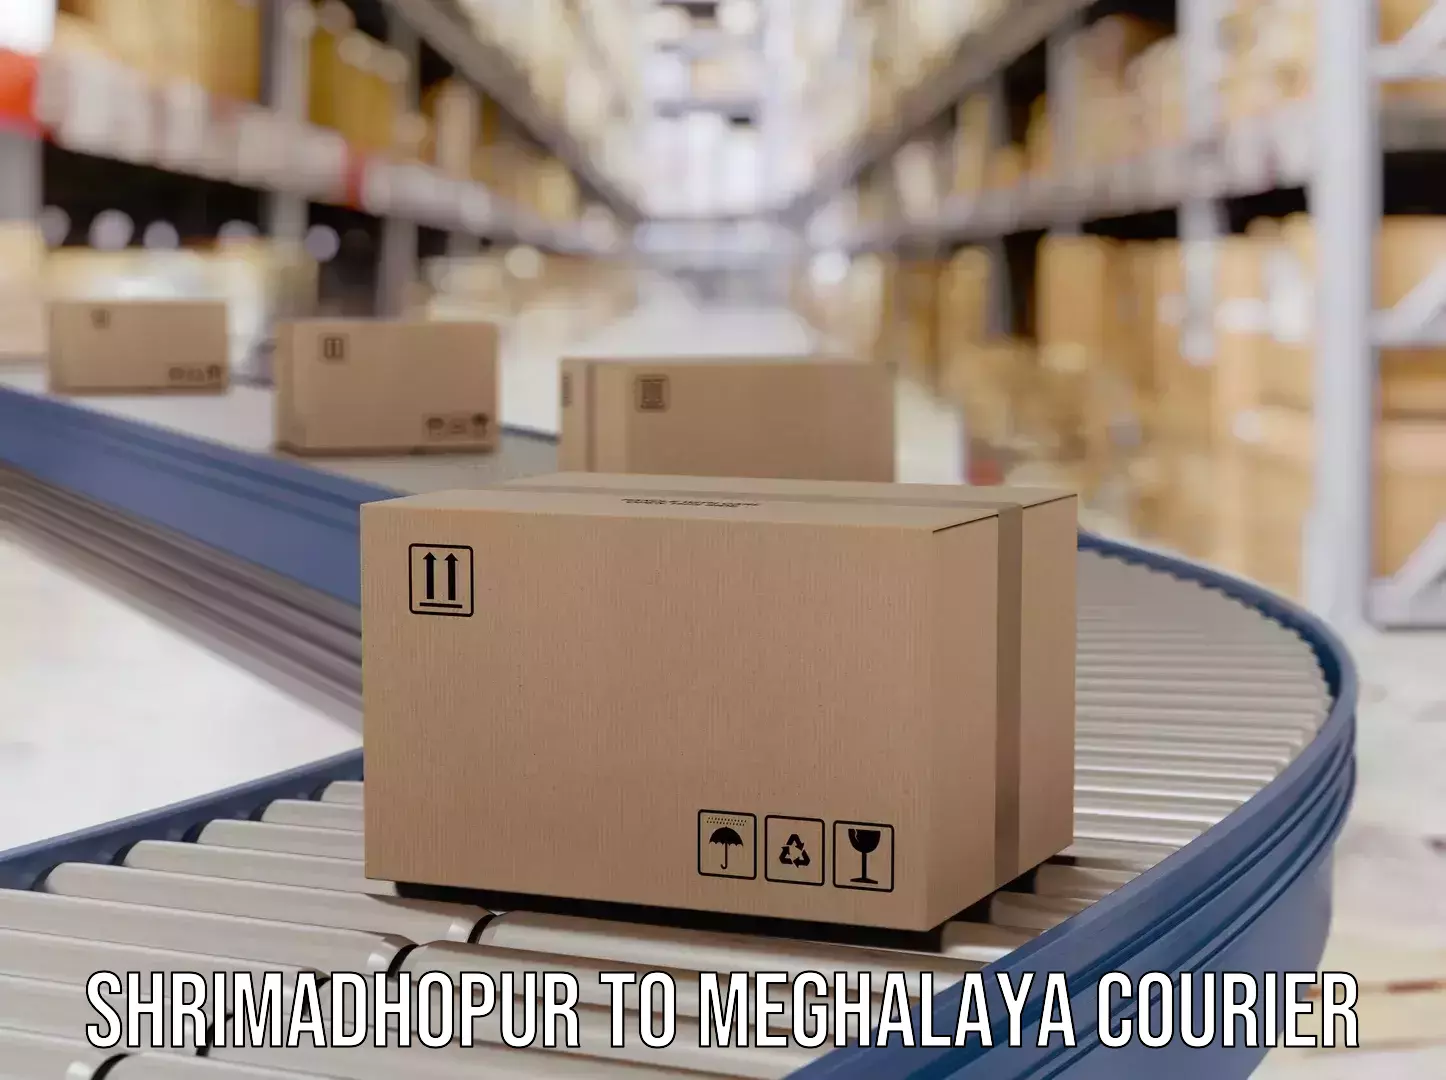 State-of-the-art courier technology Shrimadhopur to Phulbari